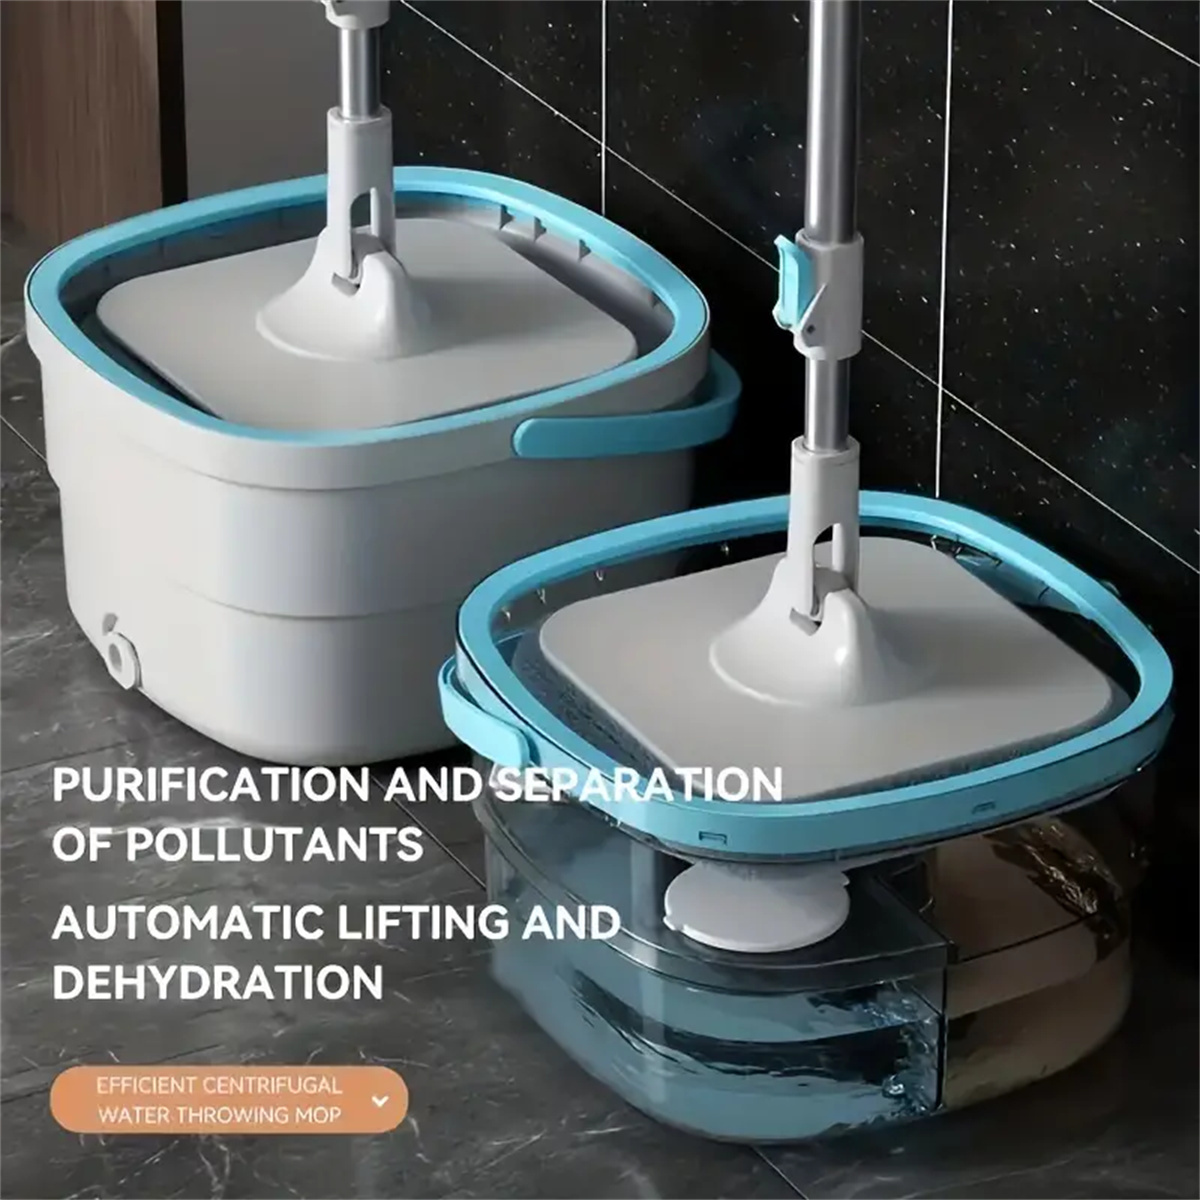 

1pc Adjustable Spin Mop And Bucket Set With 1 Reusable Microfiber Pad, 360-degree Swivel Head, Efficient Cleaning For Home Use, Plastic Material